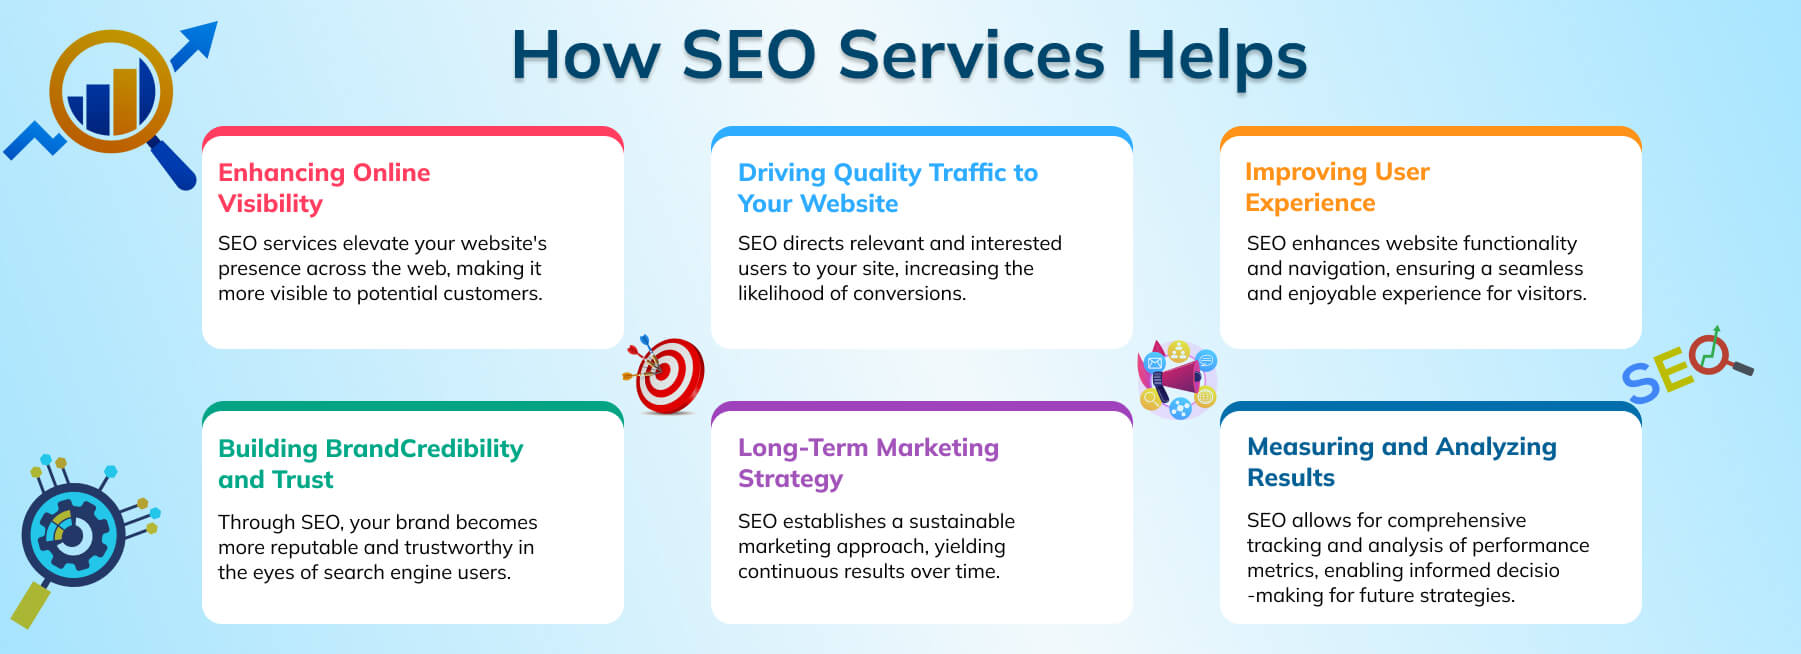 How SEO Services Helps